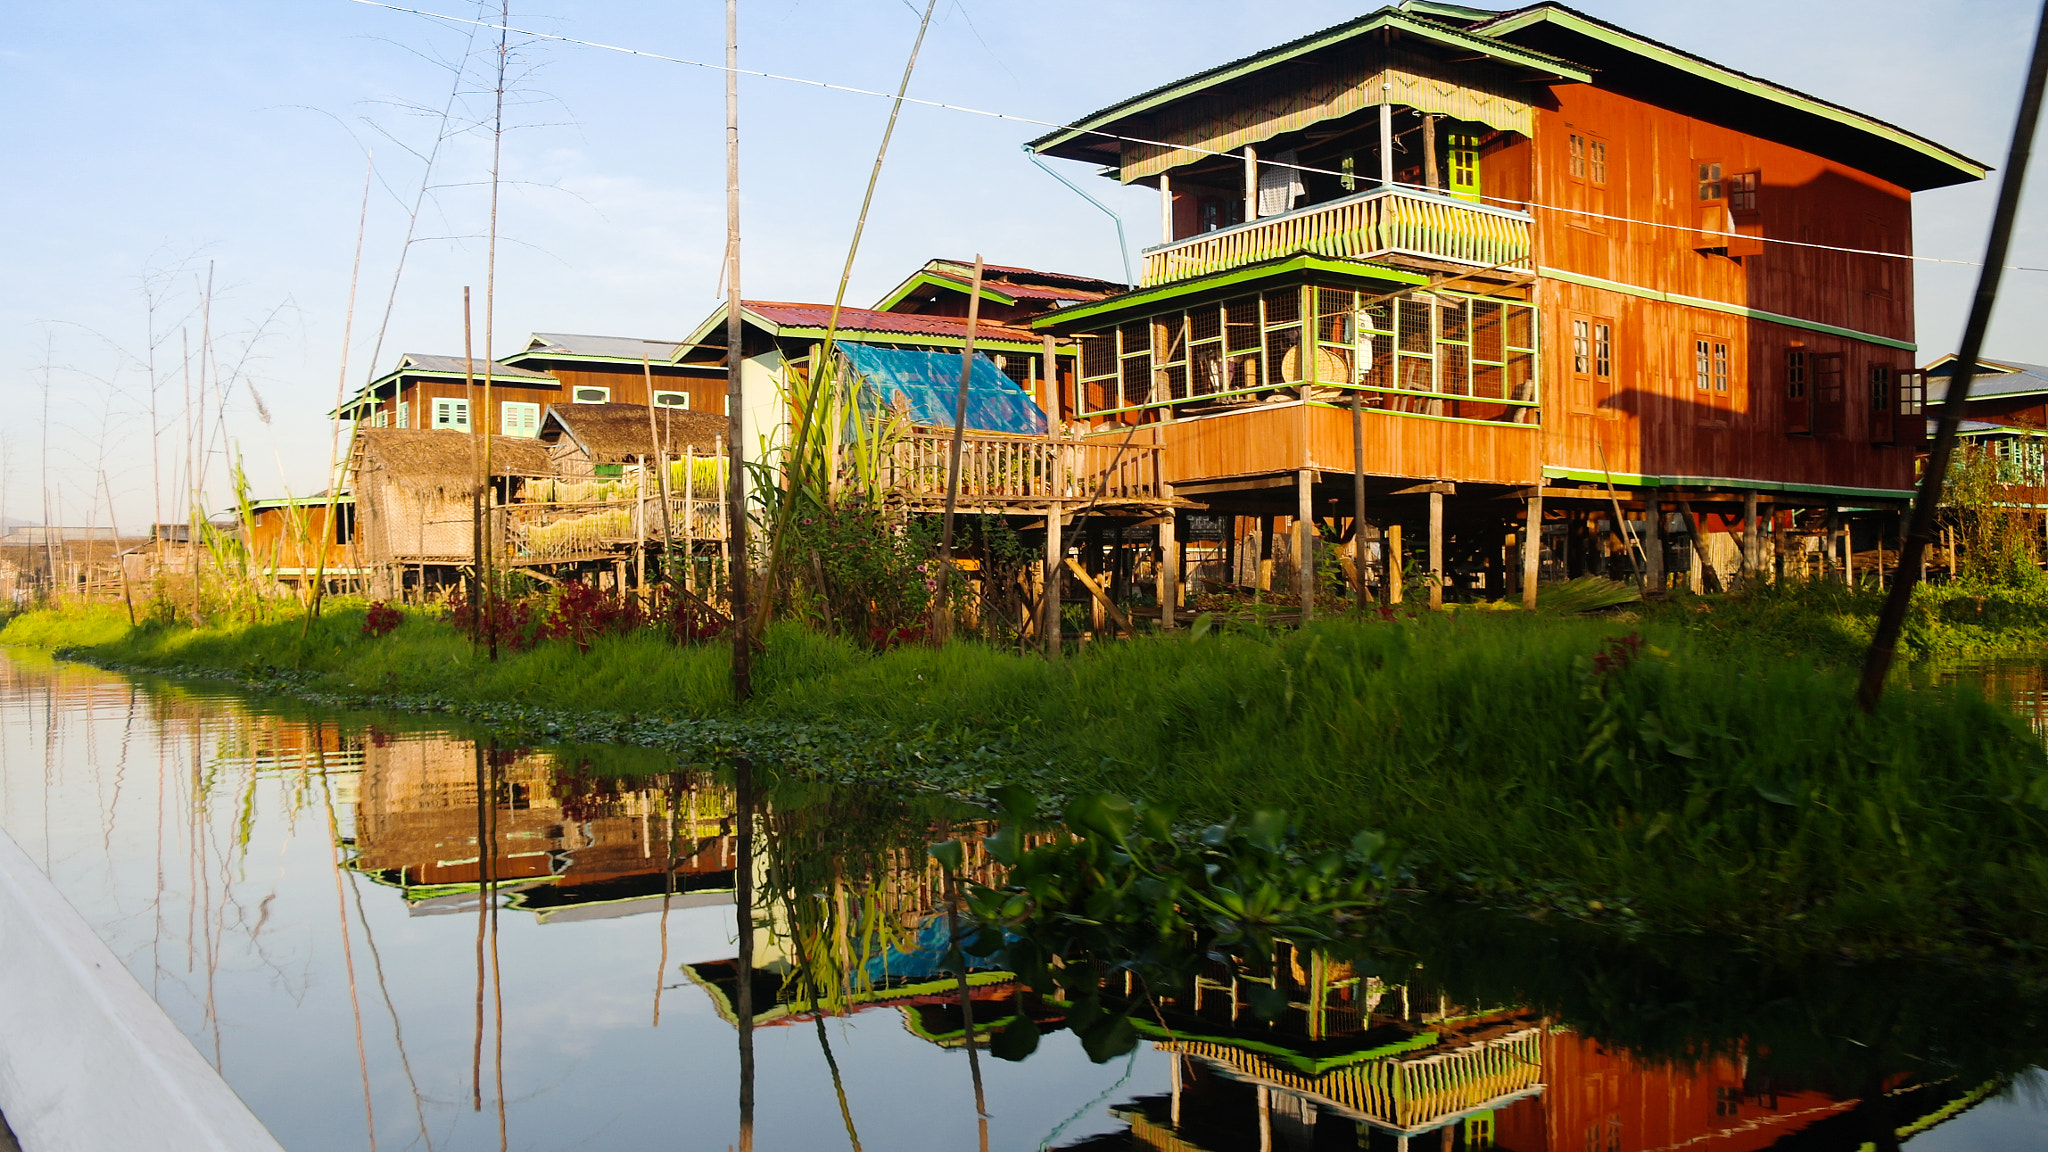 Samsung NX11 sample photo. Traditional houses on stilts in inle lake myanmar photography